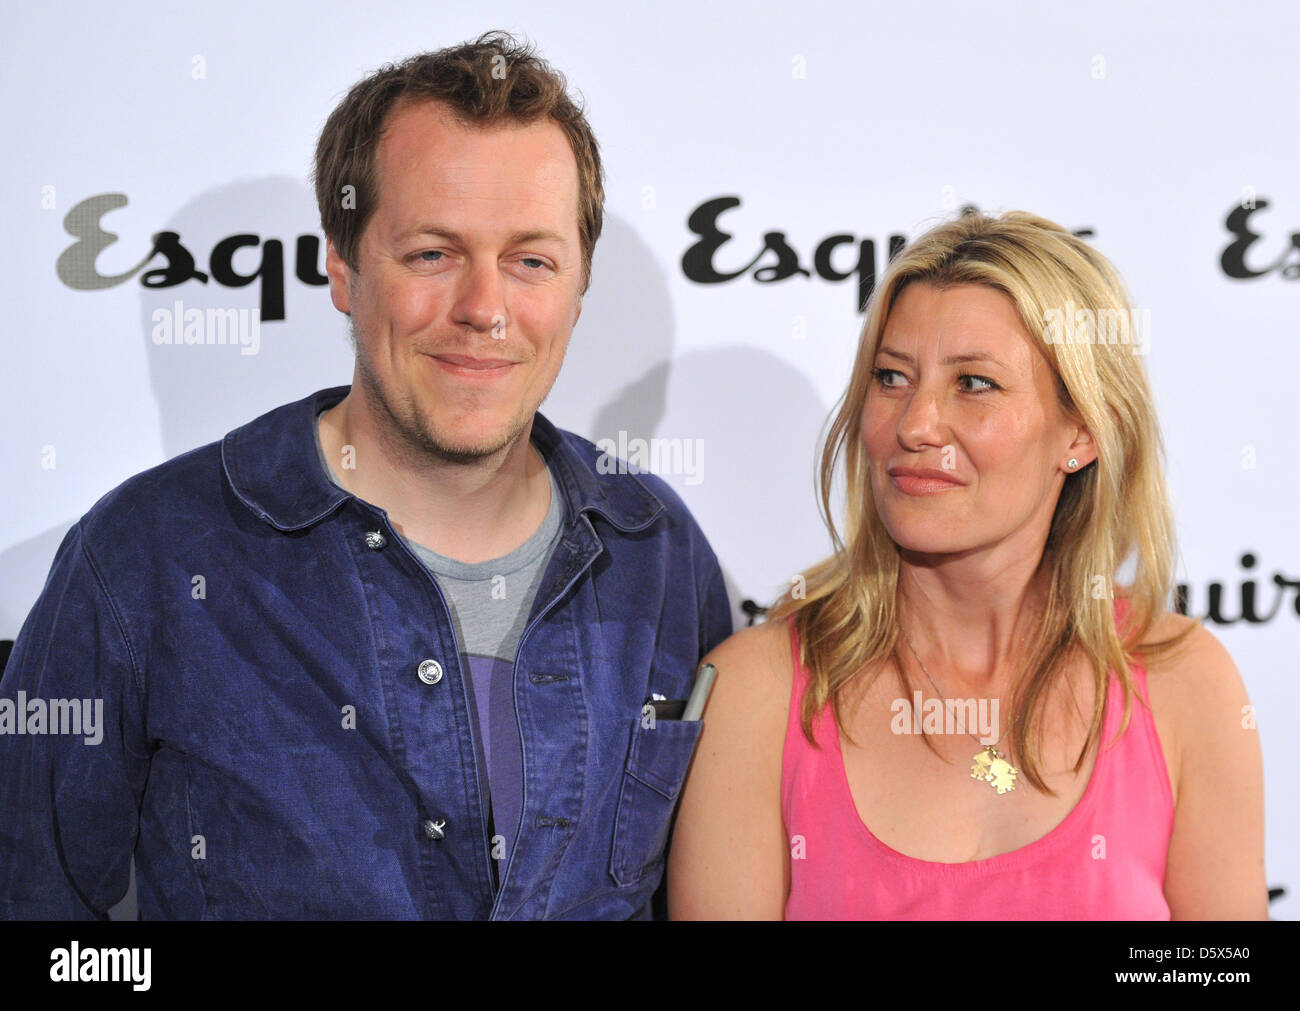 Tom parker bowles and sara buys hi-res stock photography and images - Alamy